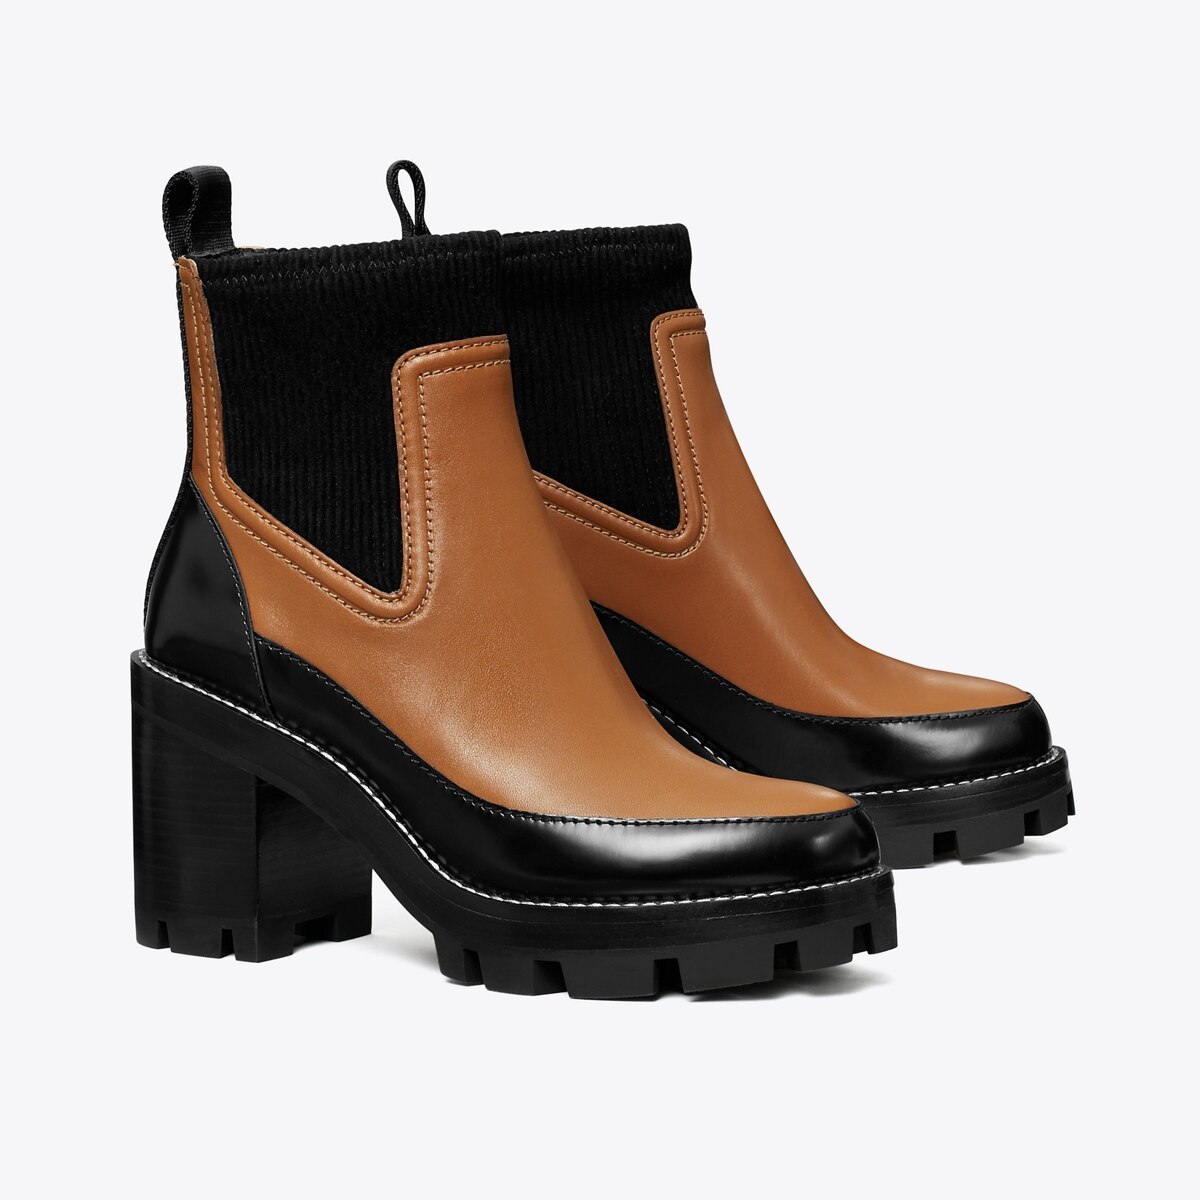 Top 35+ imagen heeled ankle boot tory burch